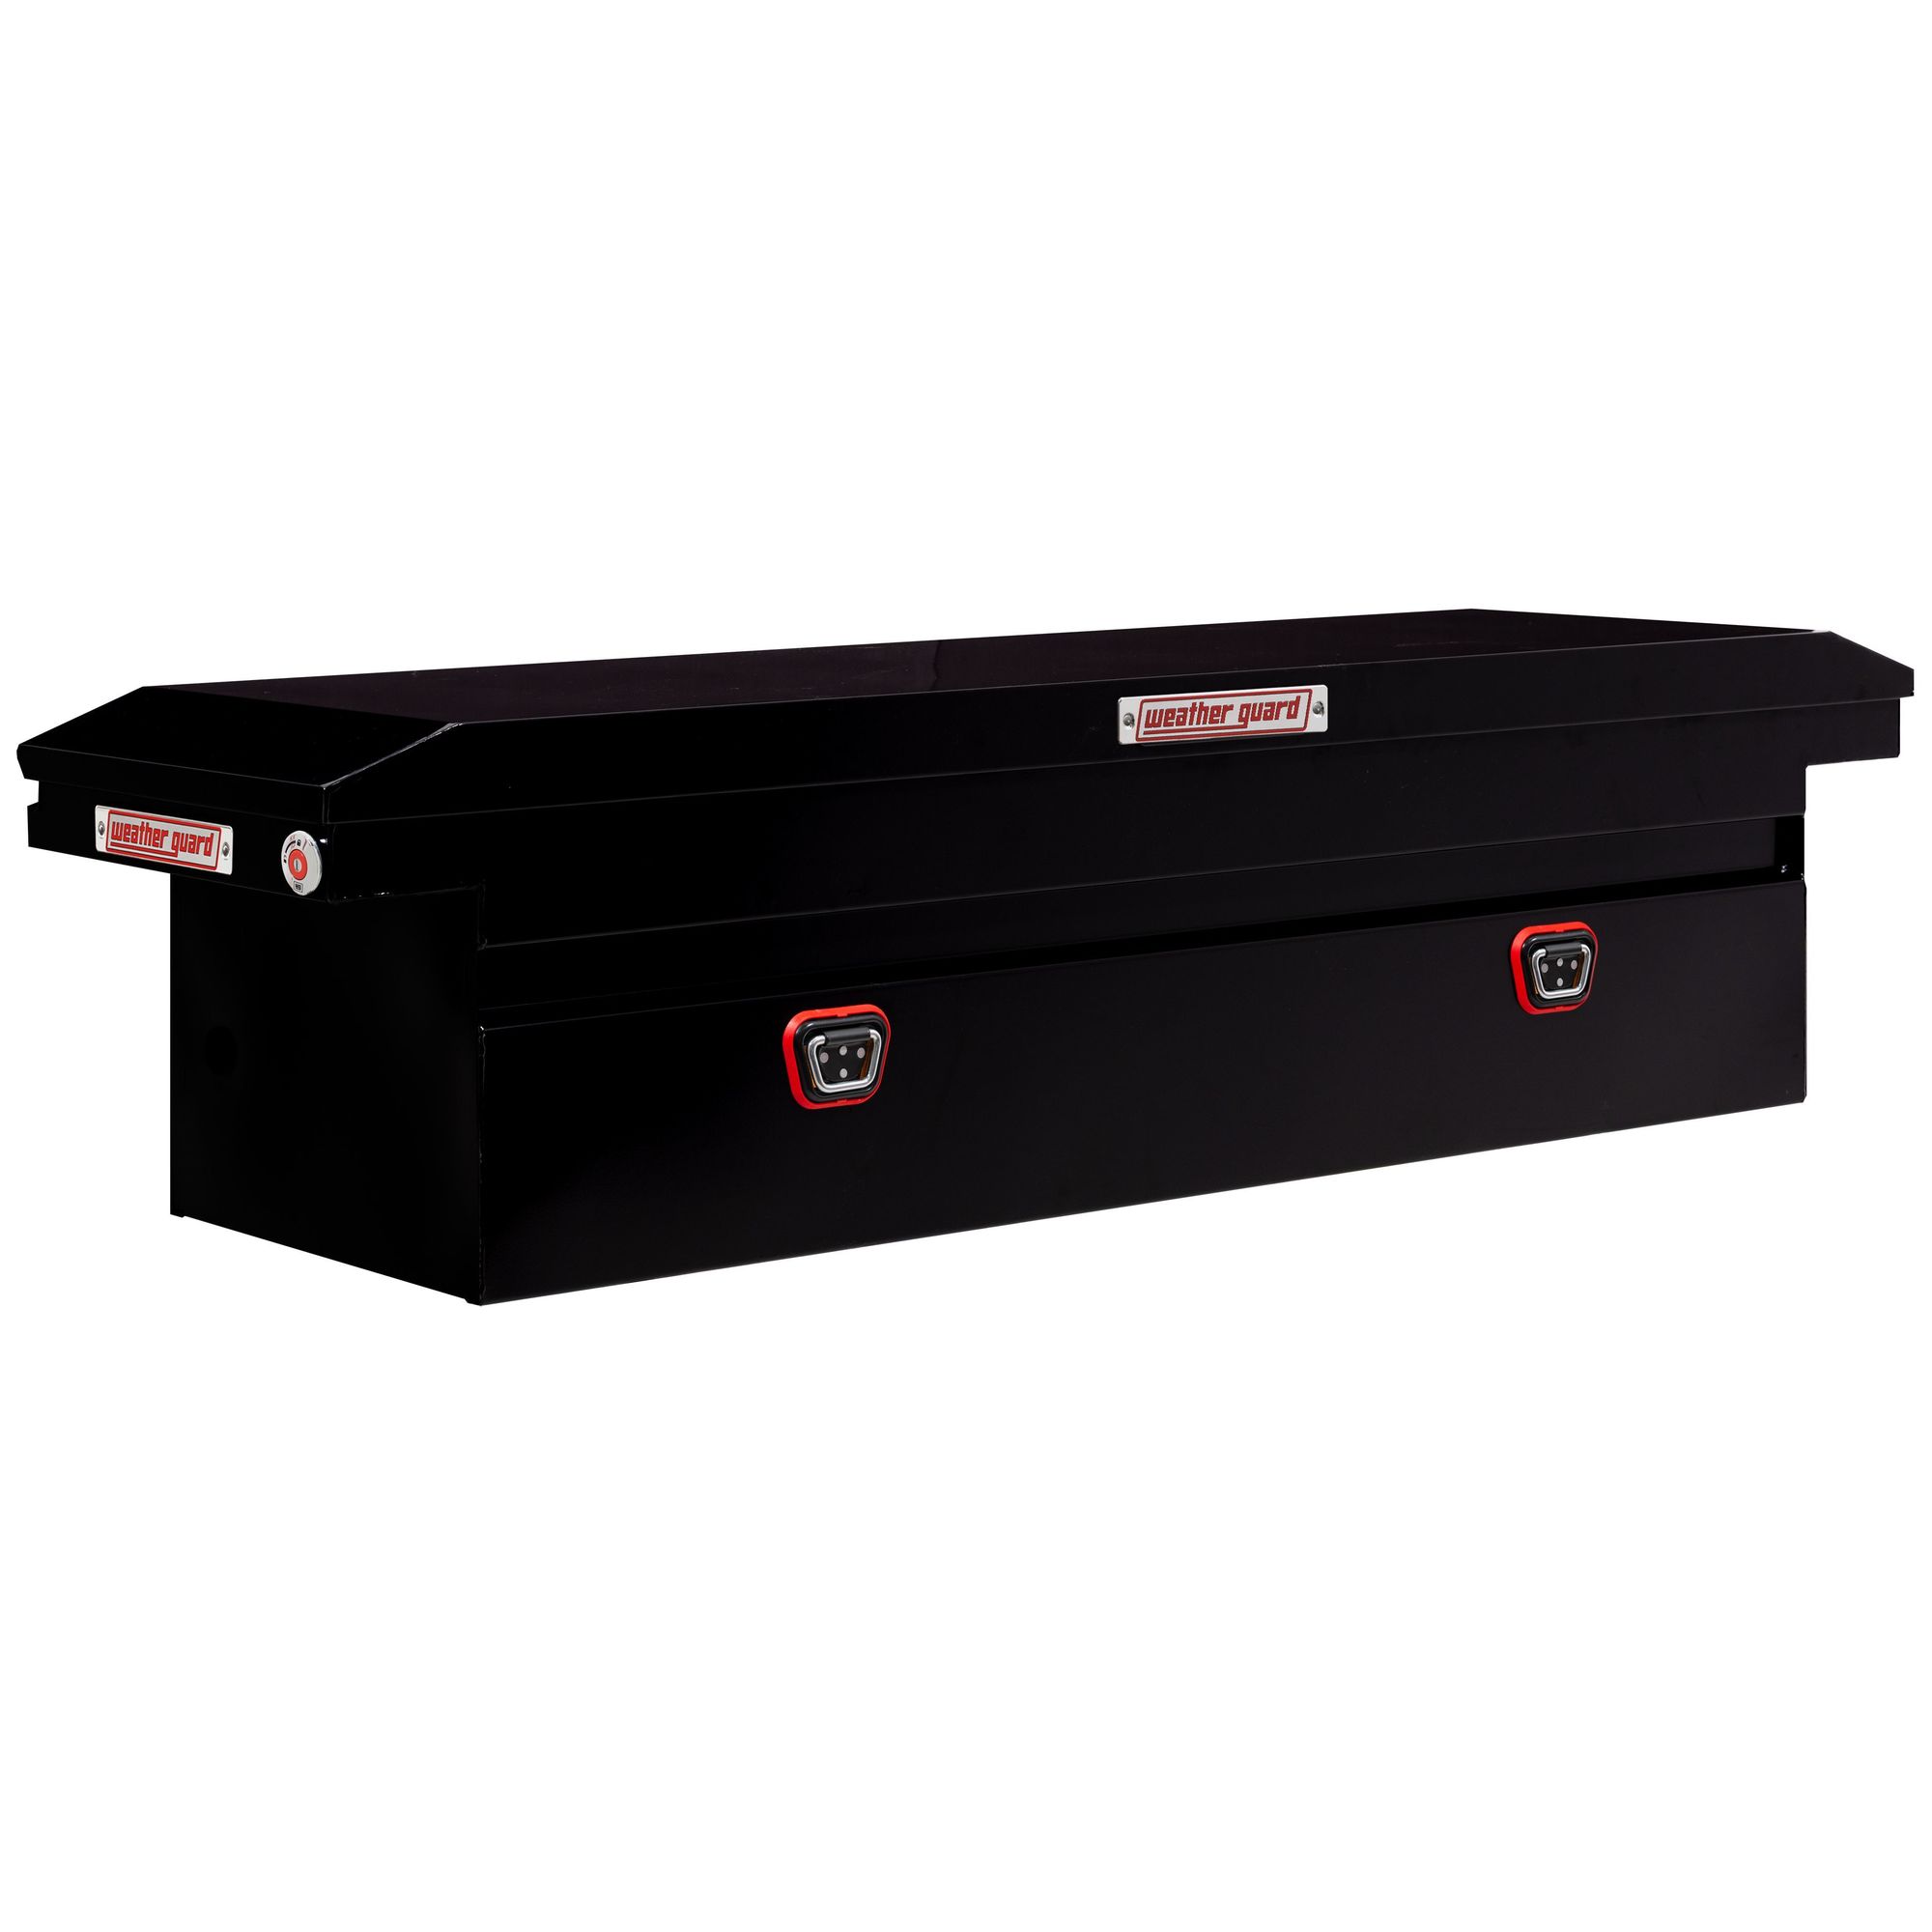 Weather Guard, 71Inch Saddle Box, Steel, Full Low Profile, Black, Width 72 in, Material Steel, Color Finish Gloss Black, Model 120-5-04